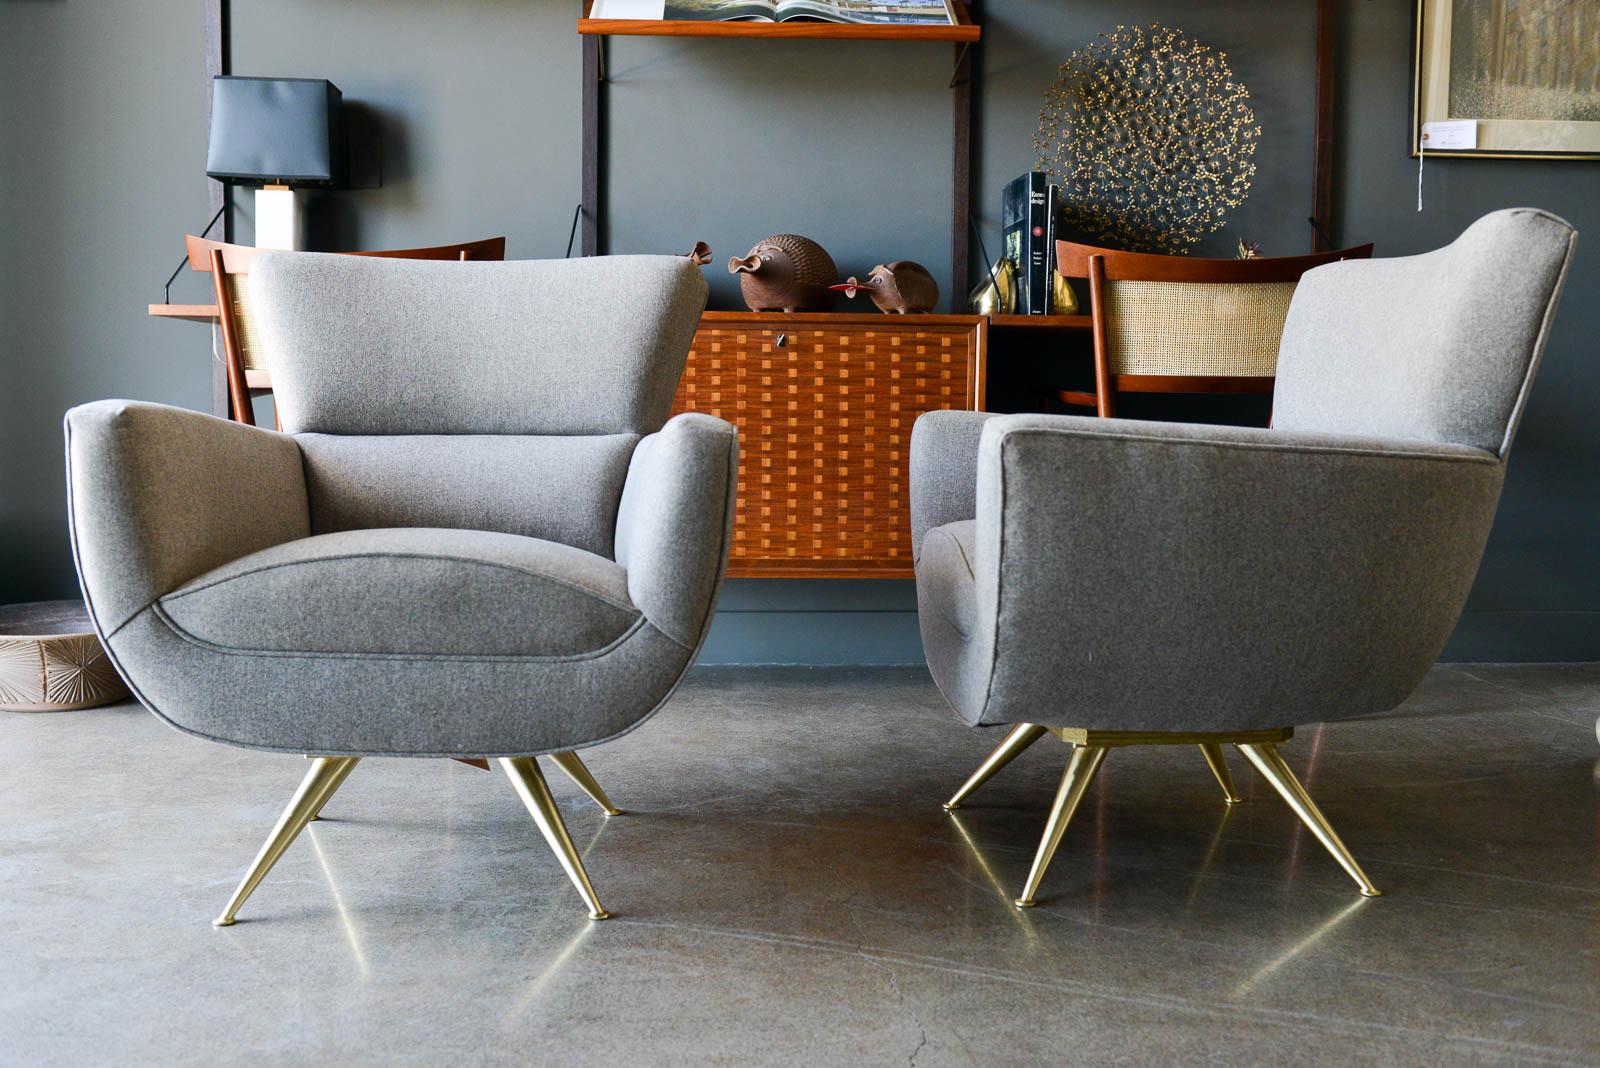 Swivel lounge chairs with brass legs by Henry P. Glass, circa 1955. Stunning design, these chairs feature a solid polished brass base on 4 sculptural legs with a swivel base that moves 360 degrees smoothly. Professionally restored to exacting